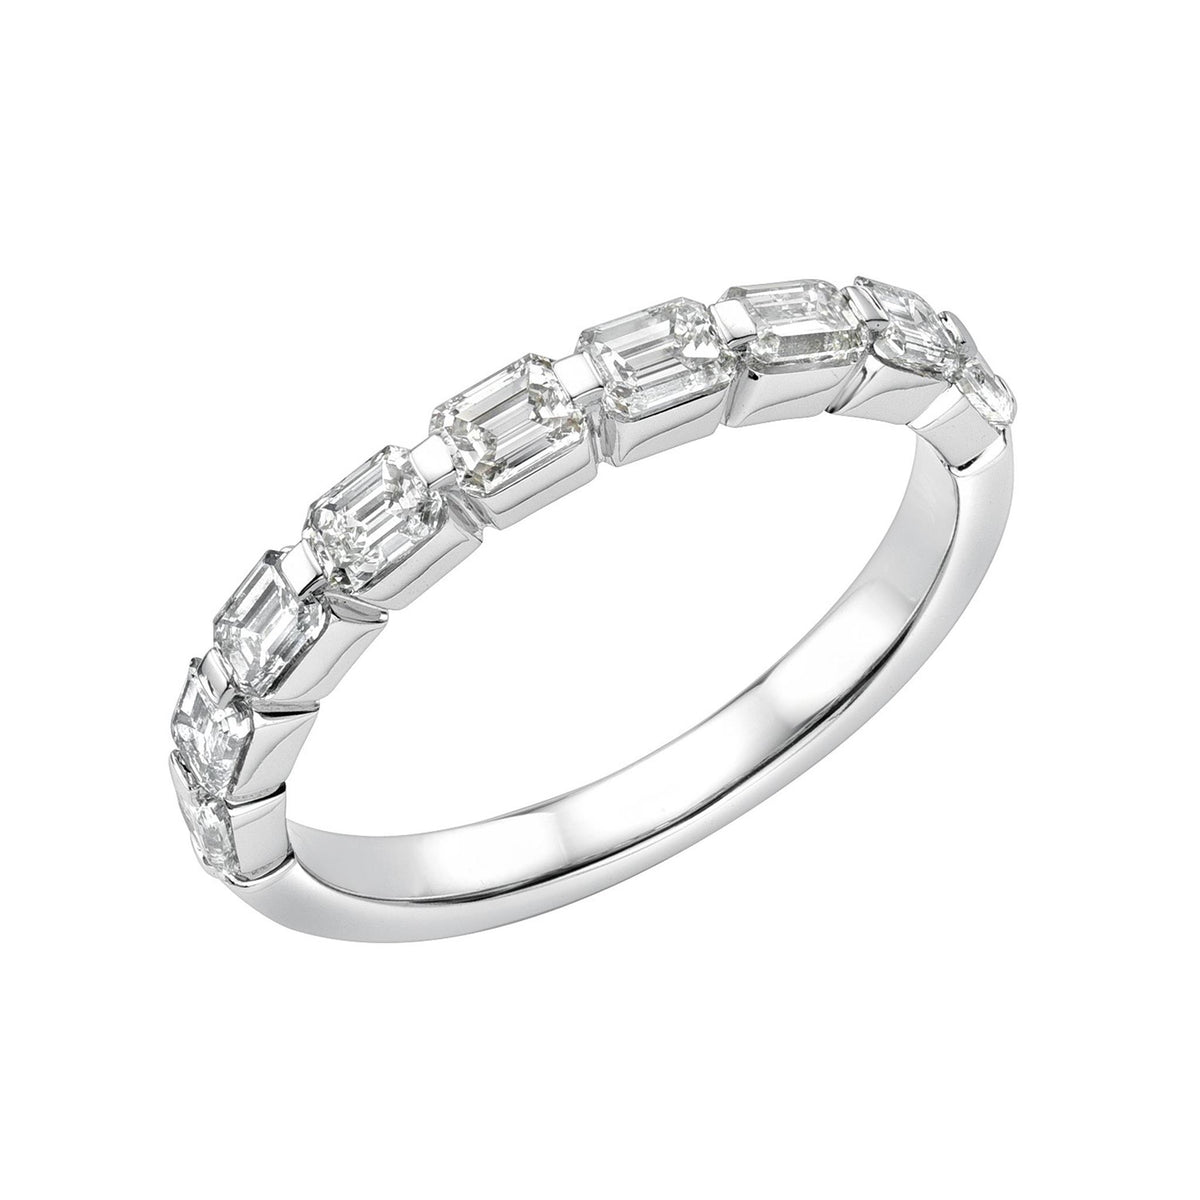 14Kt White Gold Band with 9 Baguettes Set East-West Totaling 1.03Carats